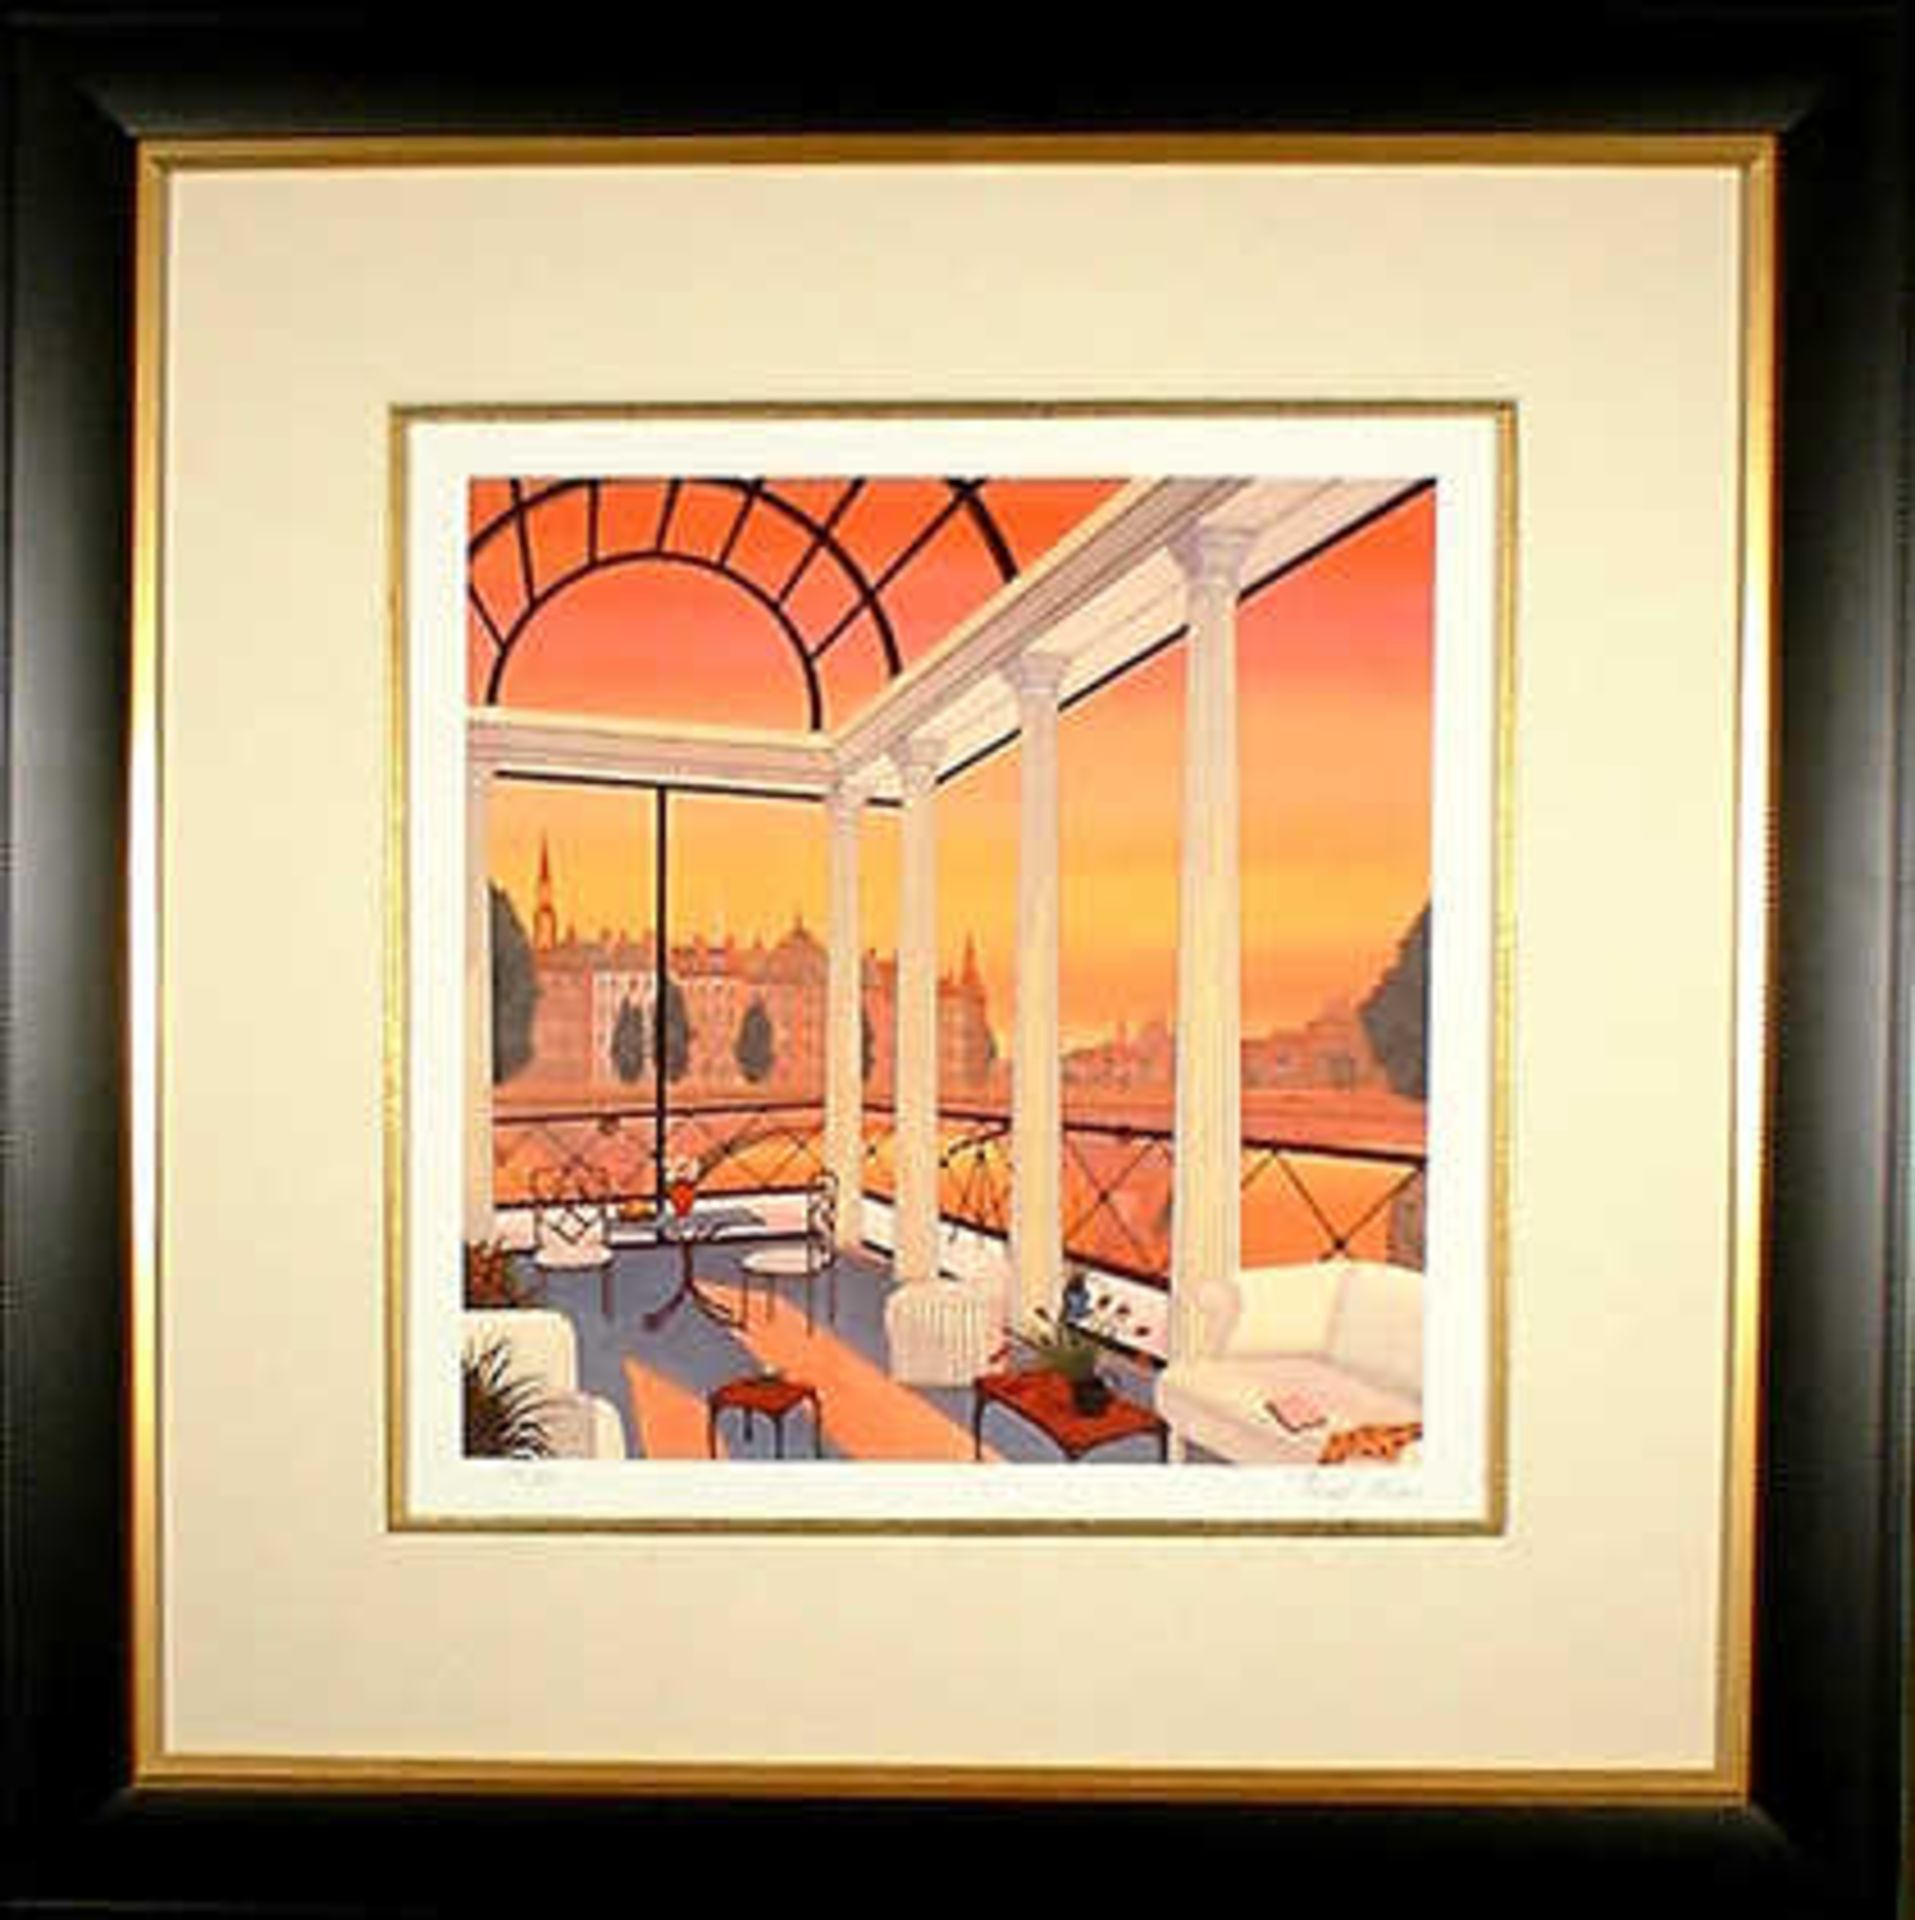 Paris Penthouse Fanch Ledan  Signed Limited Edition 118/395  Certificate of Authenticity Giclee on